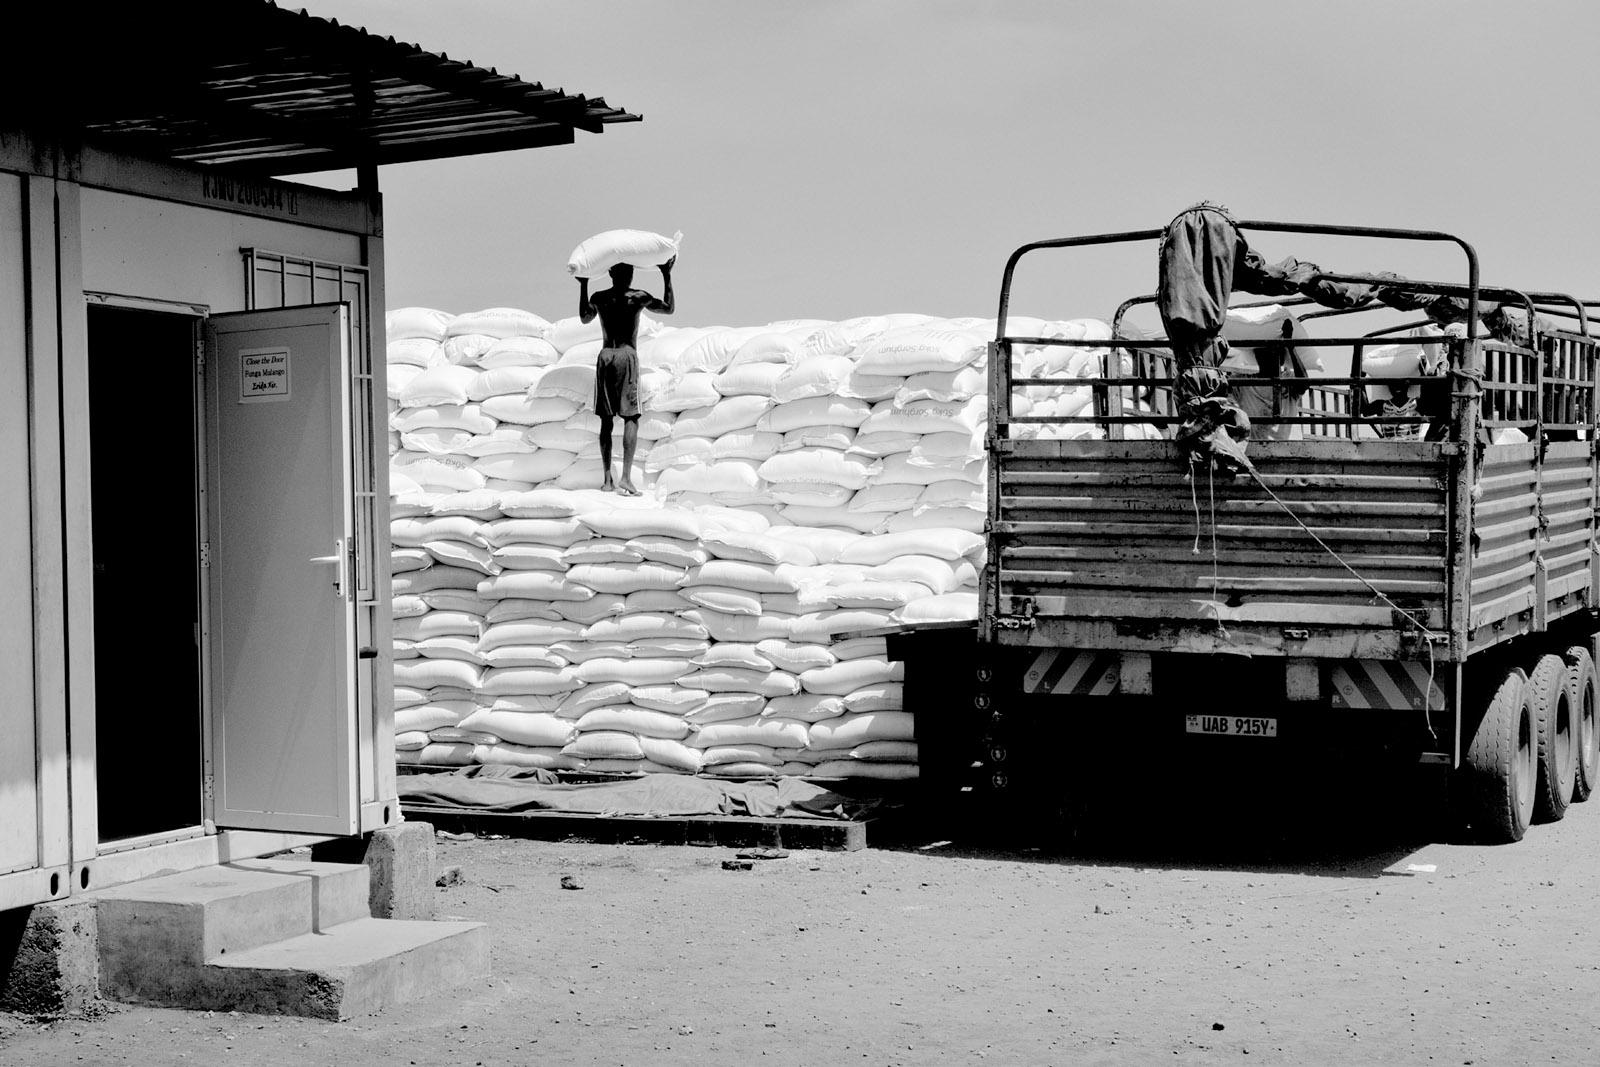 A worker stacking bags of grain at the World Food Programme warehouses in Juba, South Sudan, March 2016